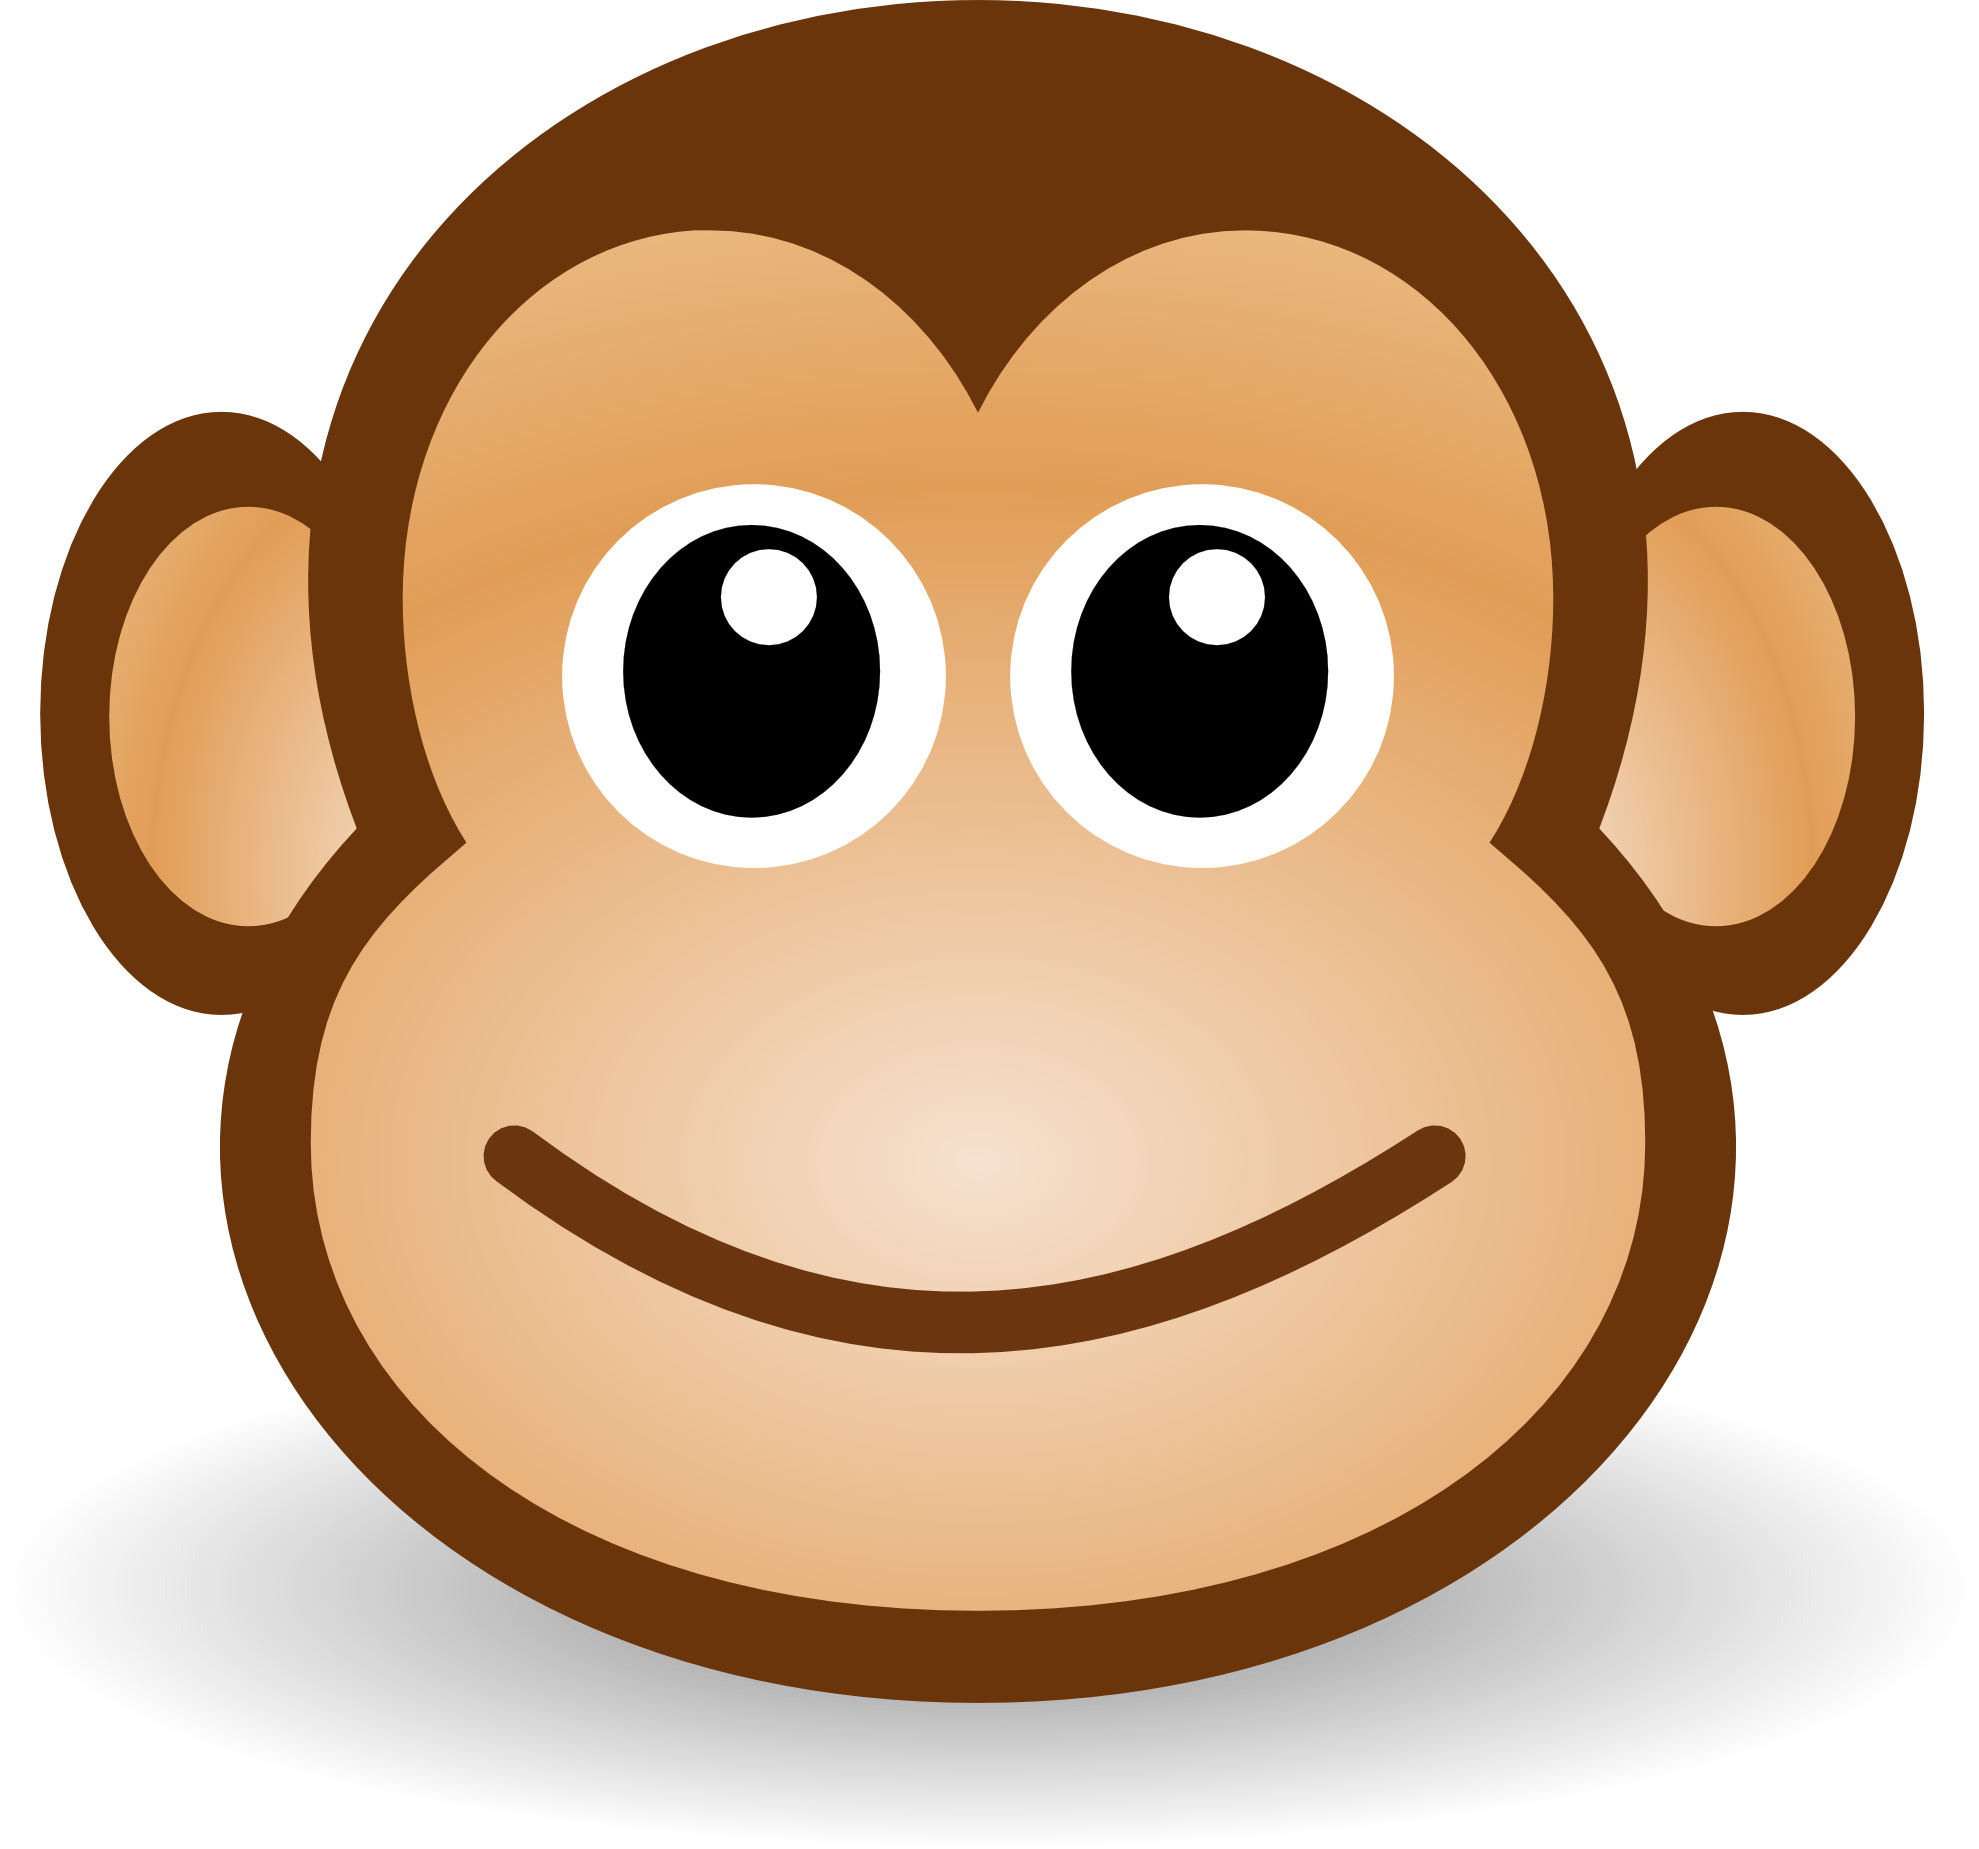 18 Cartoon Monkey Faces   Free Cliparts That You Can Download To You